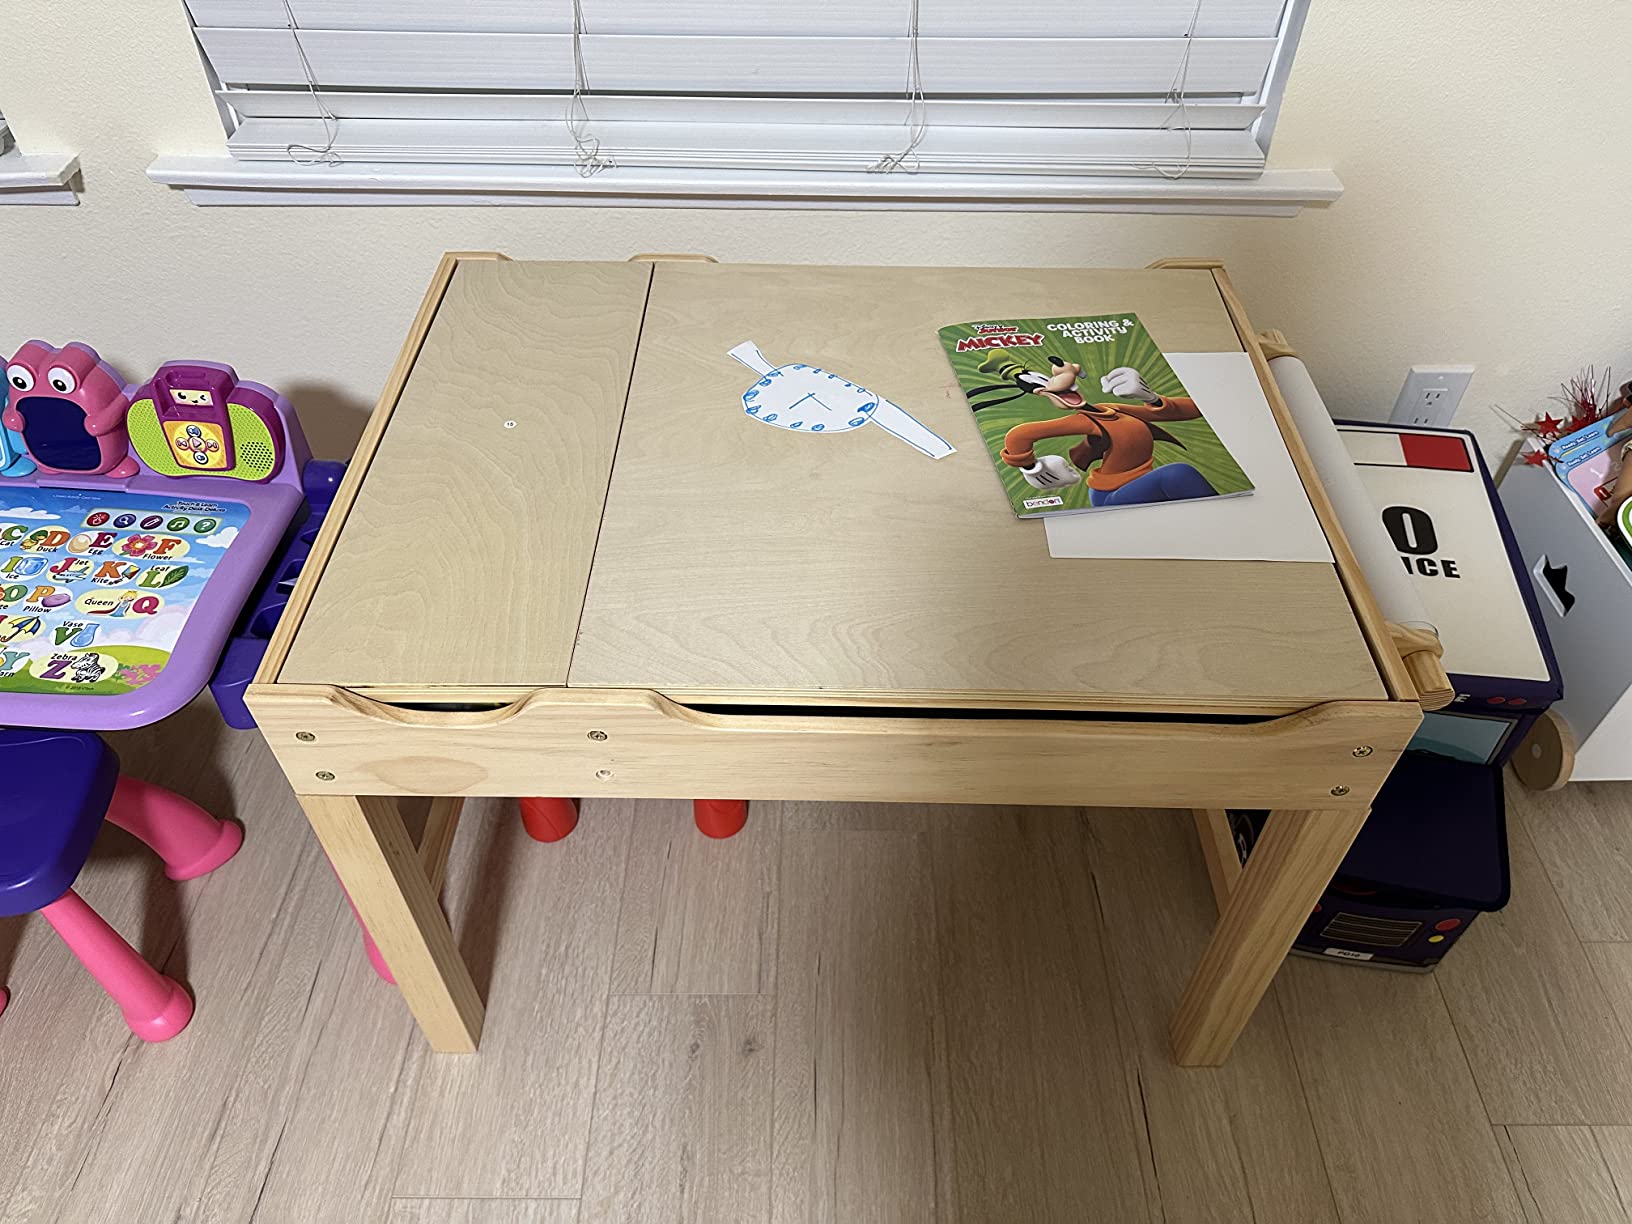 Heavy and sturdy table for 4 year old